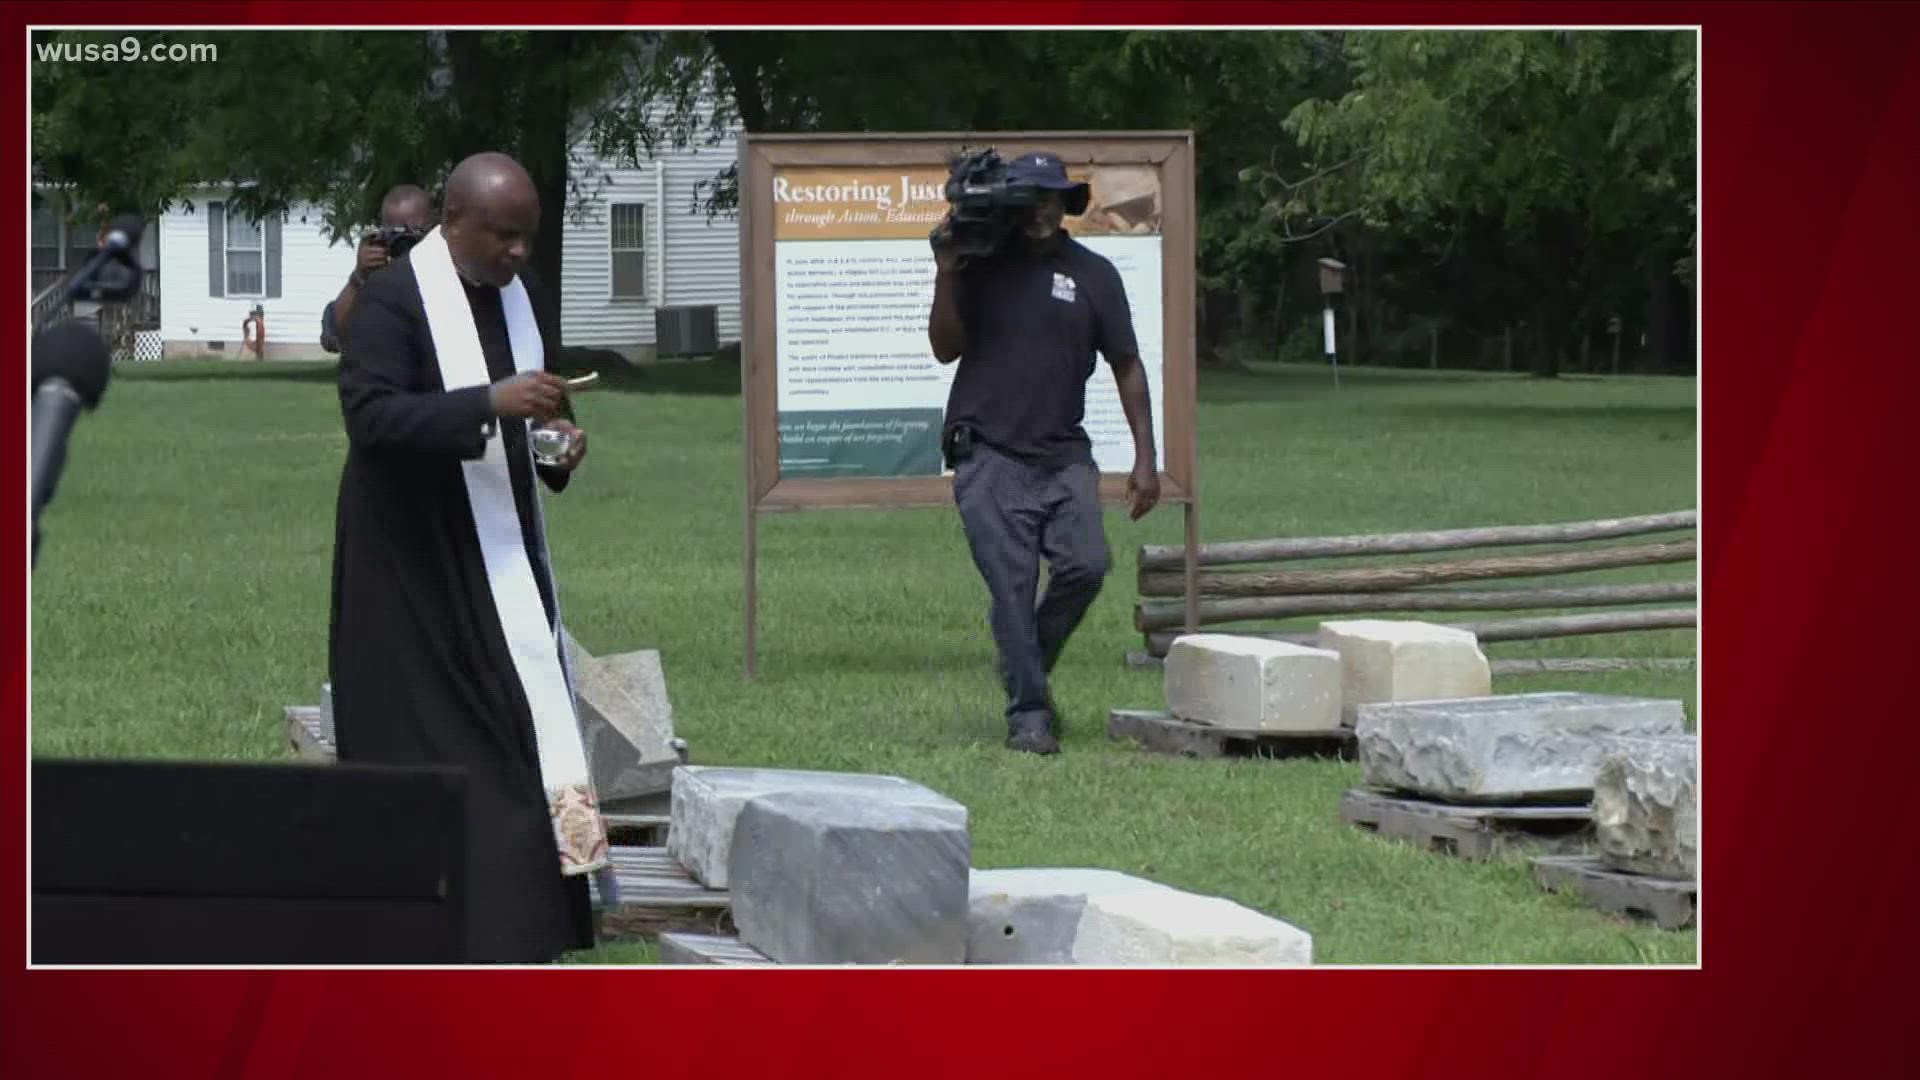 Virginia returns 55 historic African American gravestones found tossed along the Potomac River to a Maryland cemetery.